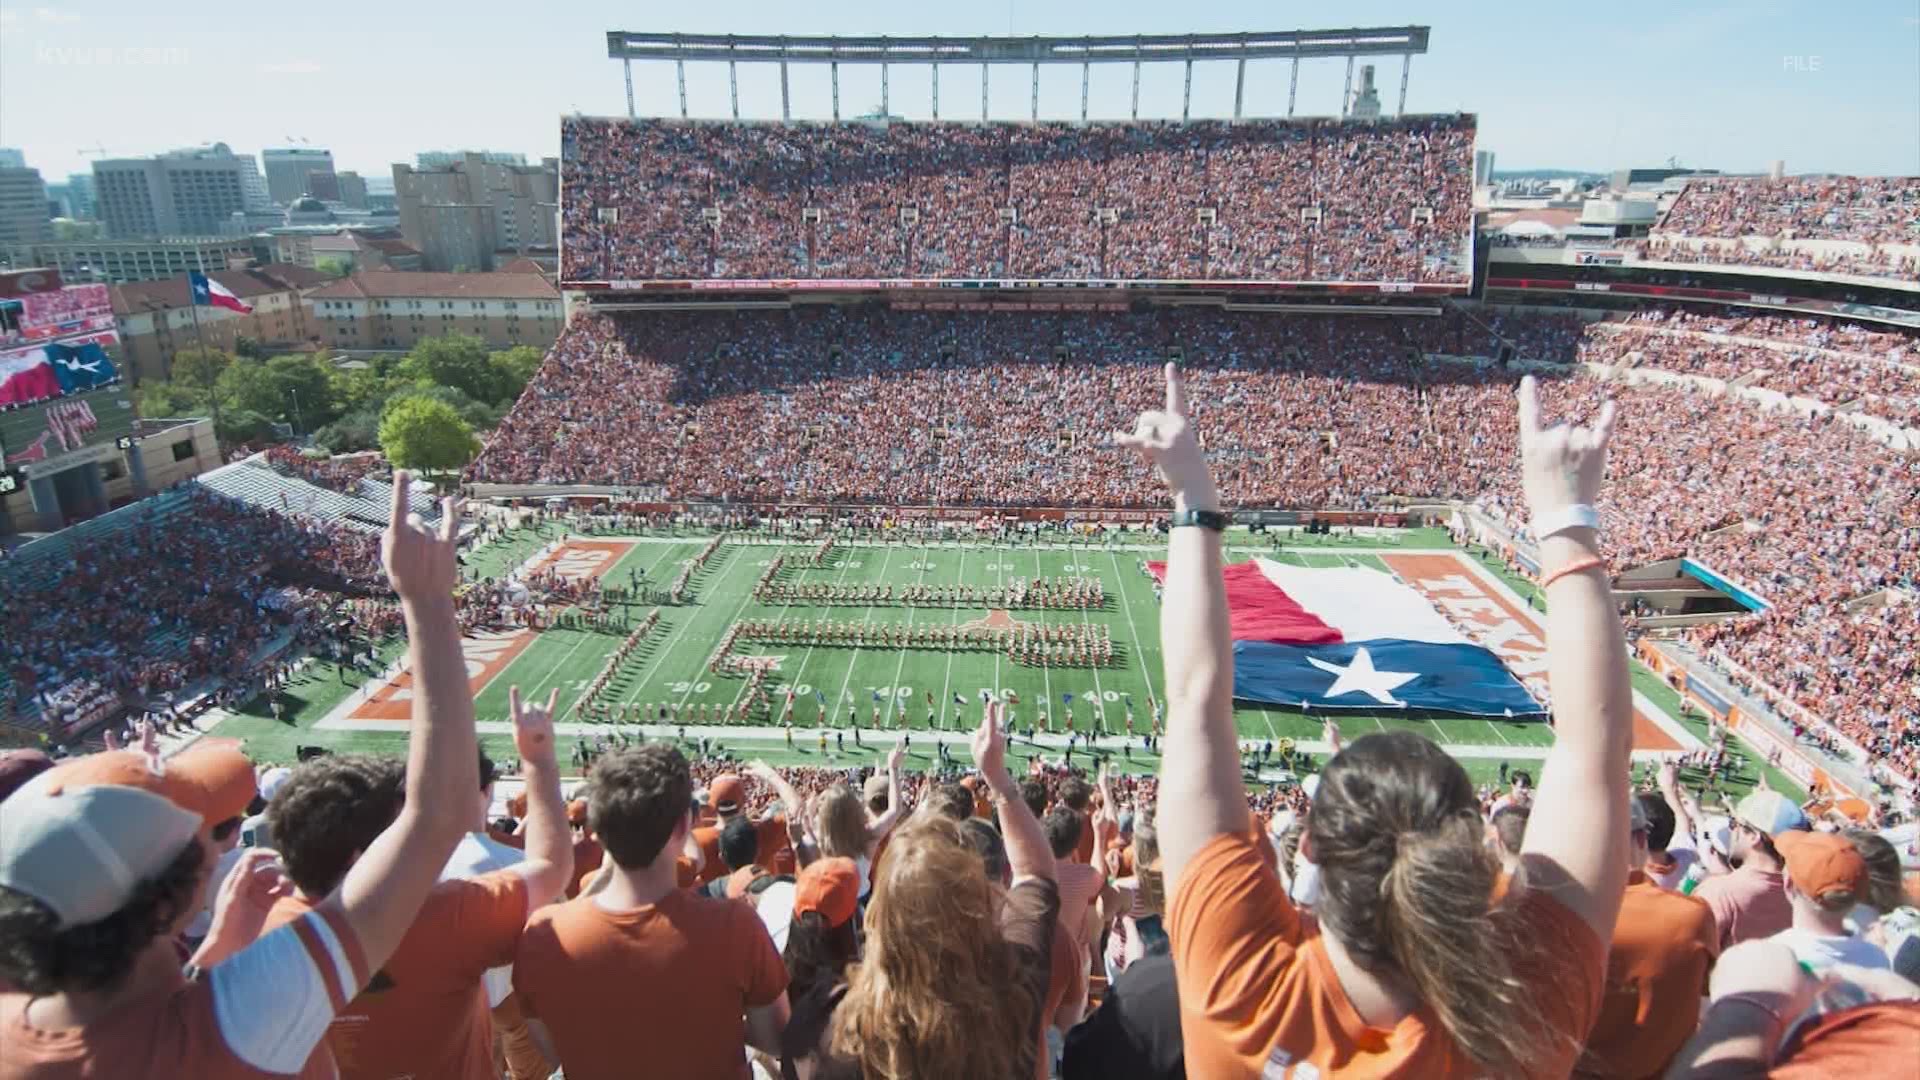 Wealthy donors are threatening to stop giving the University of Texas at Austin money if the school stops using "The Eyes of Texas" as its alma mater.